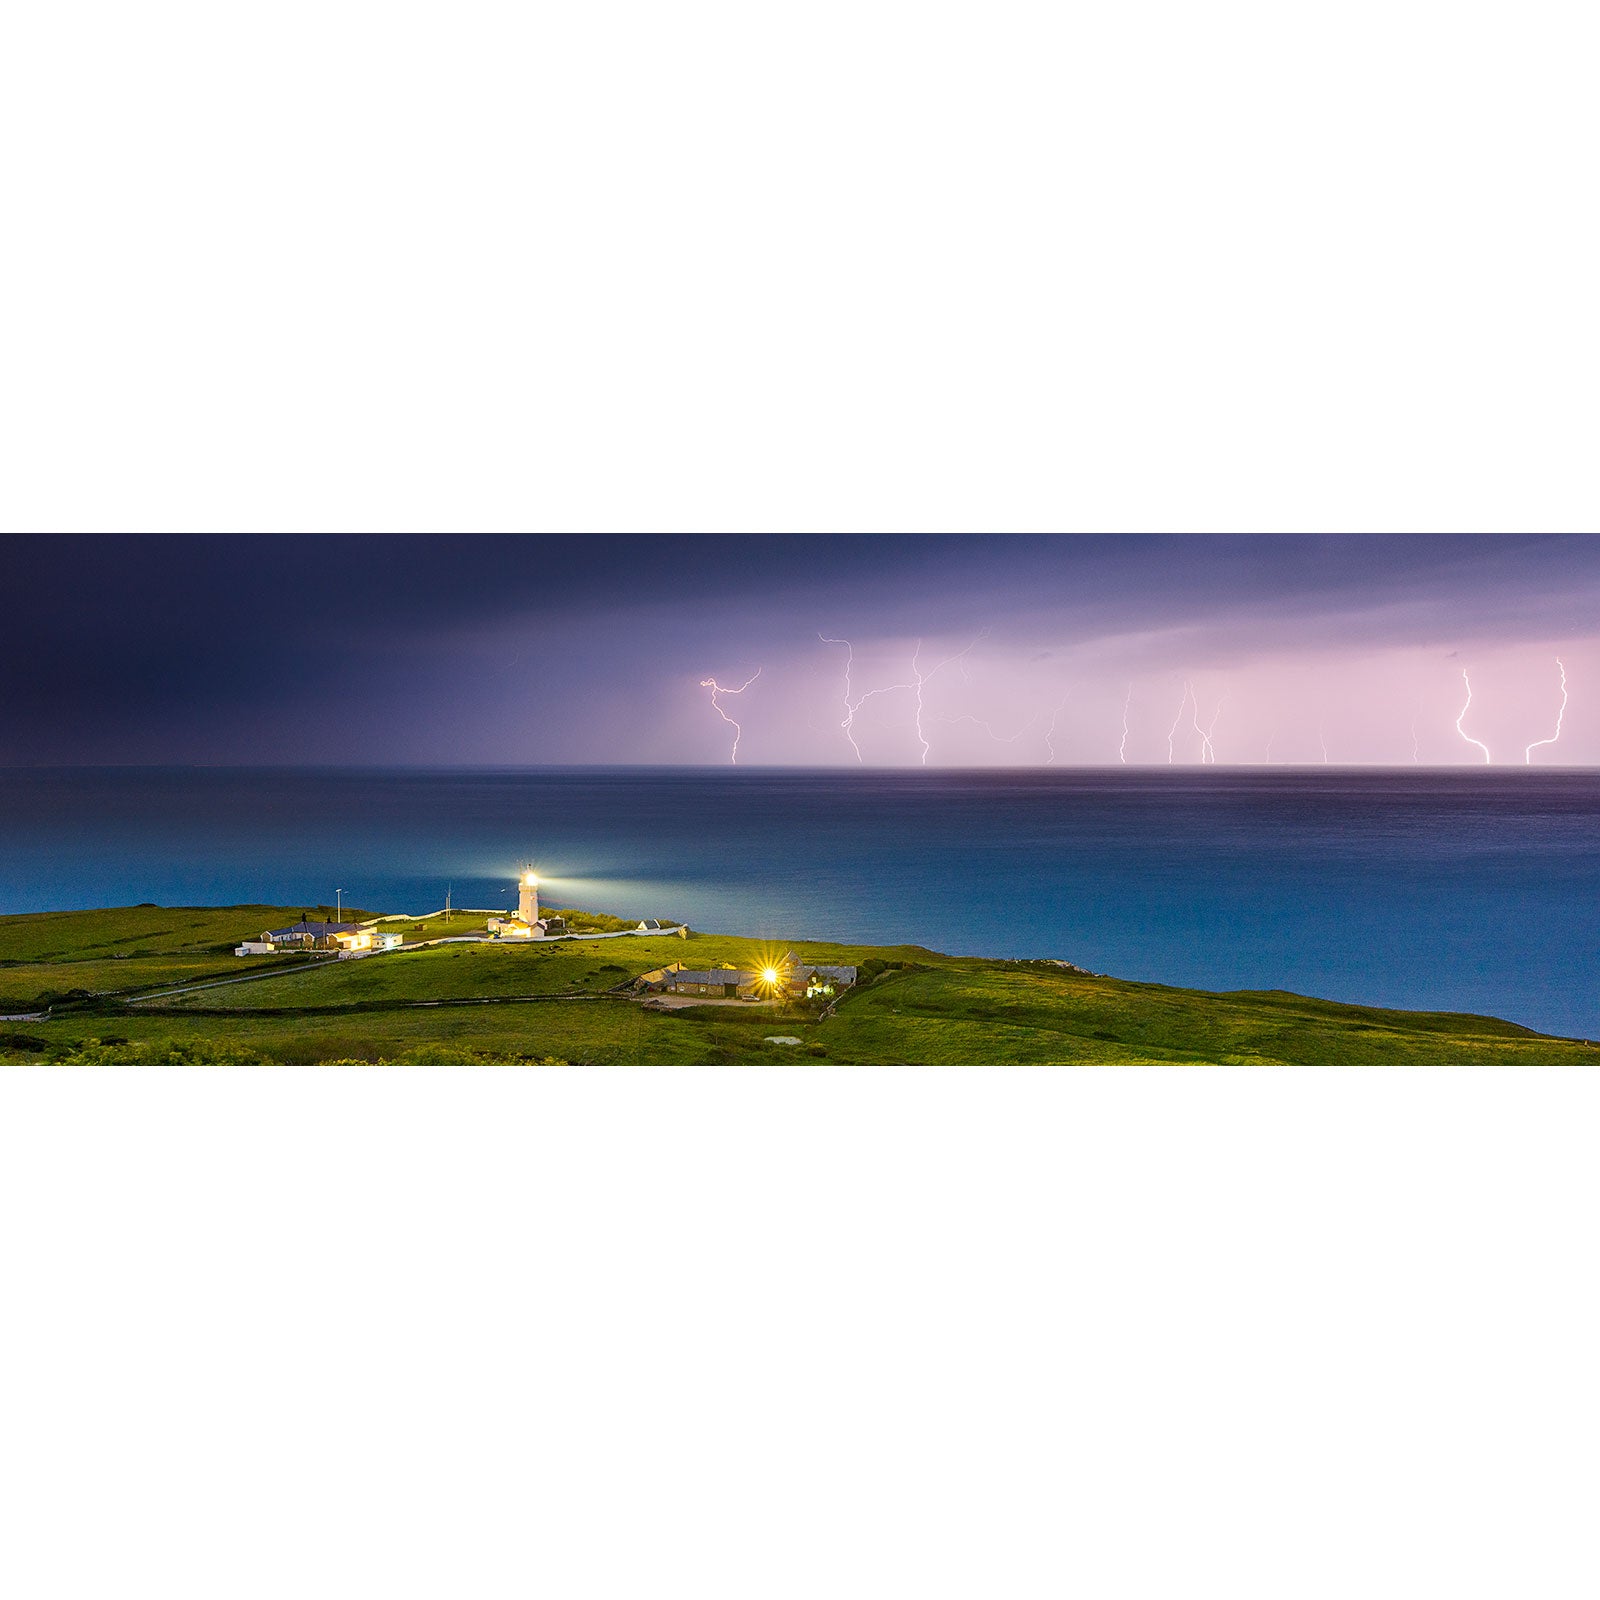 Lightning at St. Catherine's Lighthouse - Available Light Photography